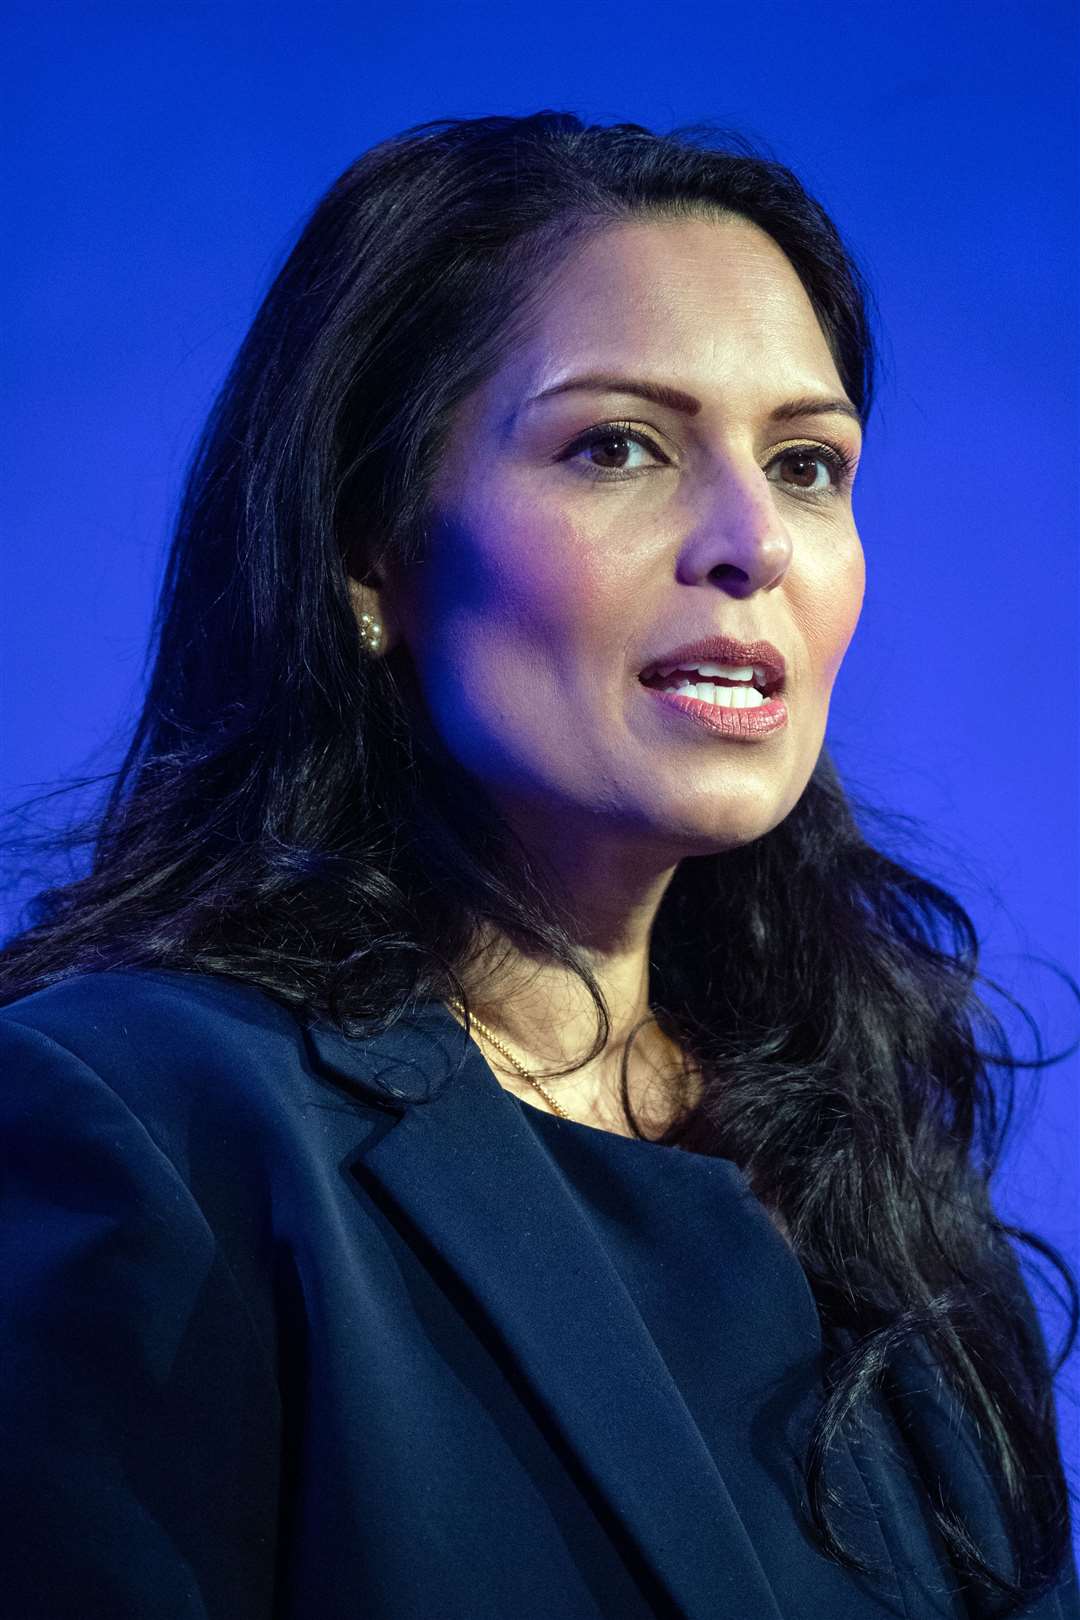 Priti Patel is considering enlisting the Royal Navy’s help to deal with migrants attempting to cross the Channel (Dominic Lipinski/PA)